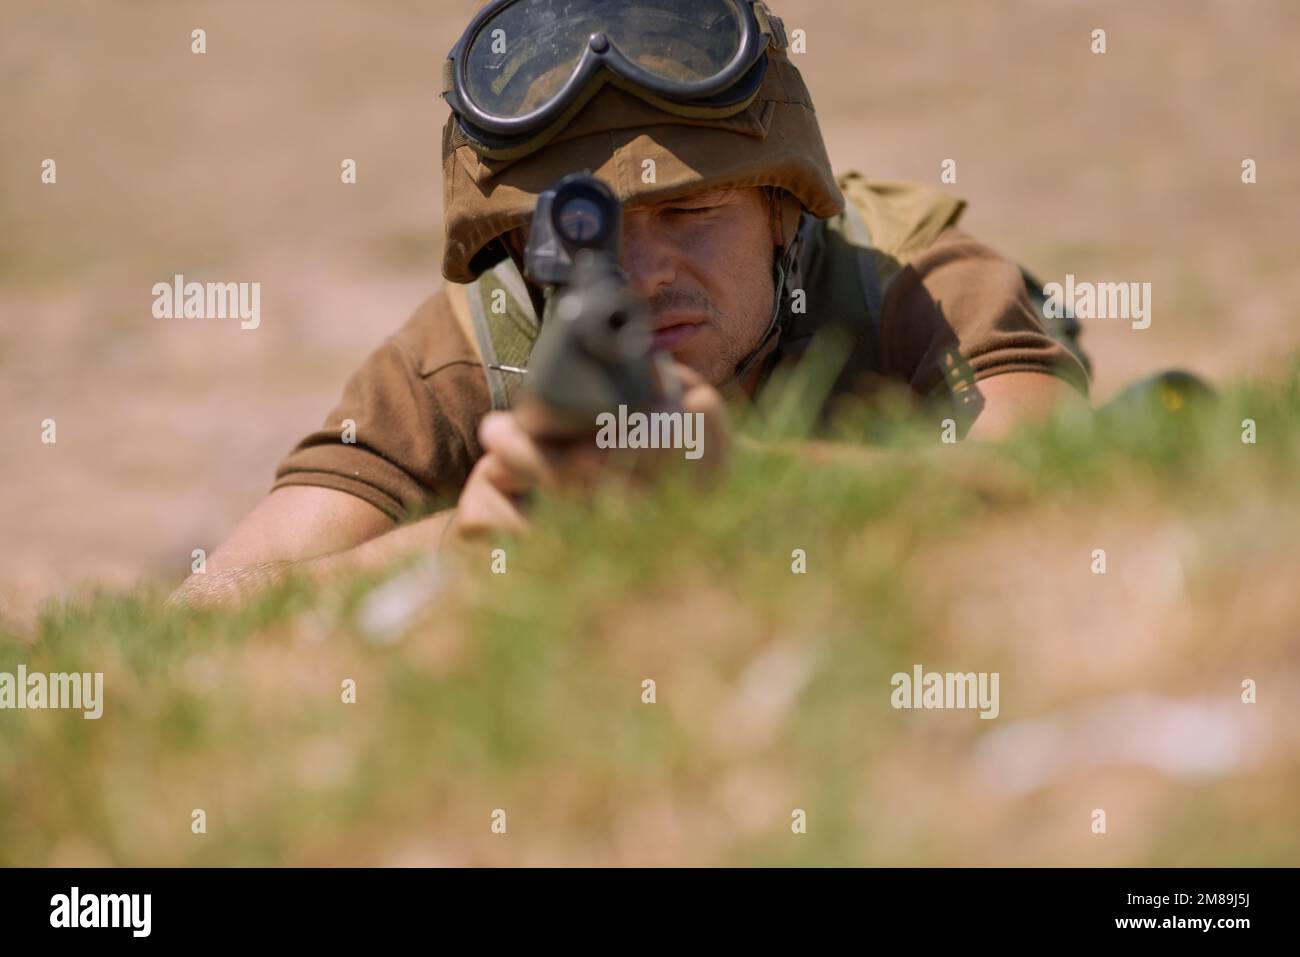 Aiming at you. A young soldier aiming with his rifle while lying on the ground. Stock Photo